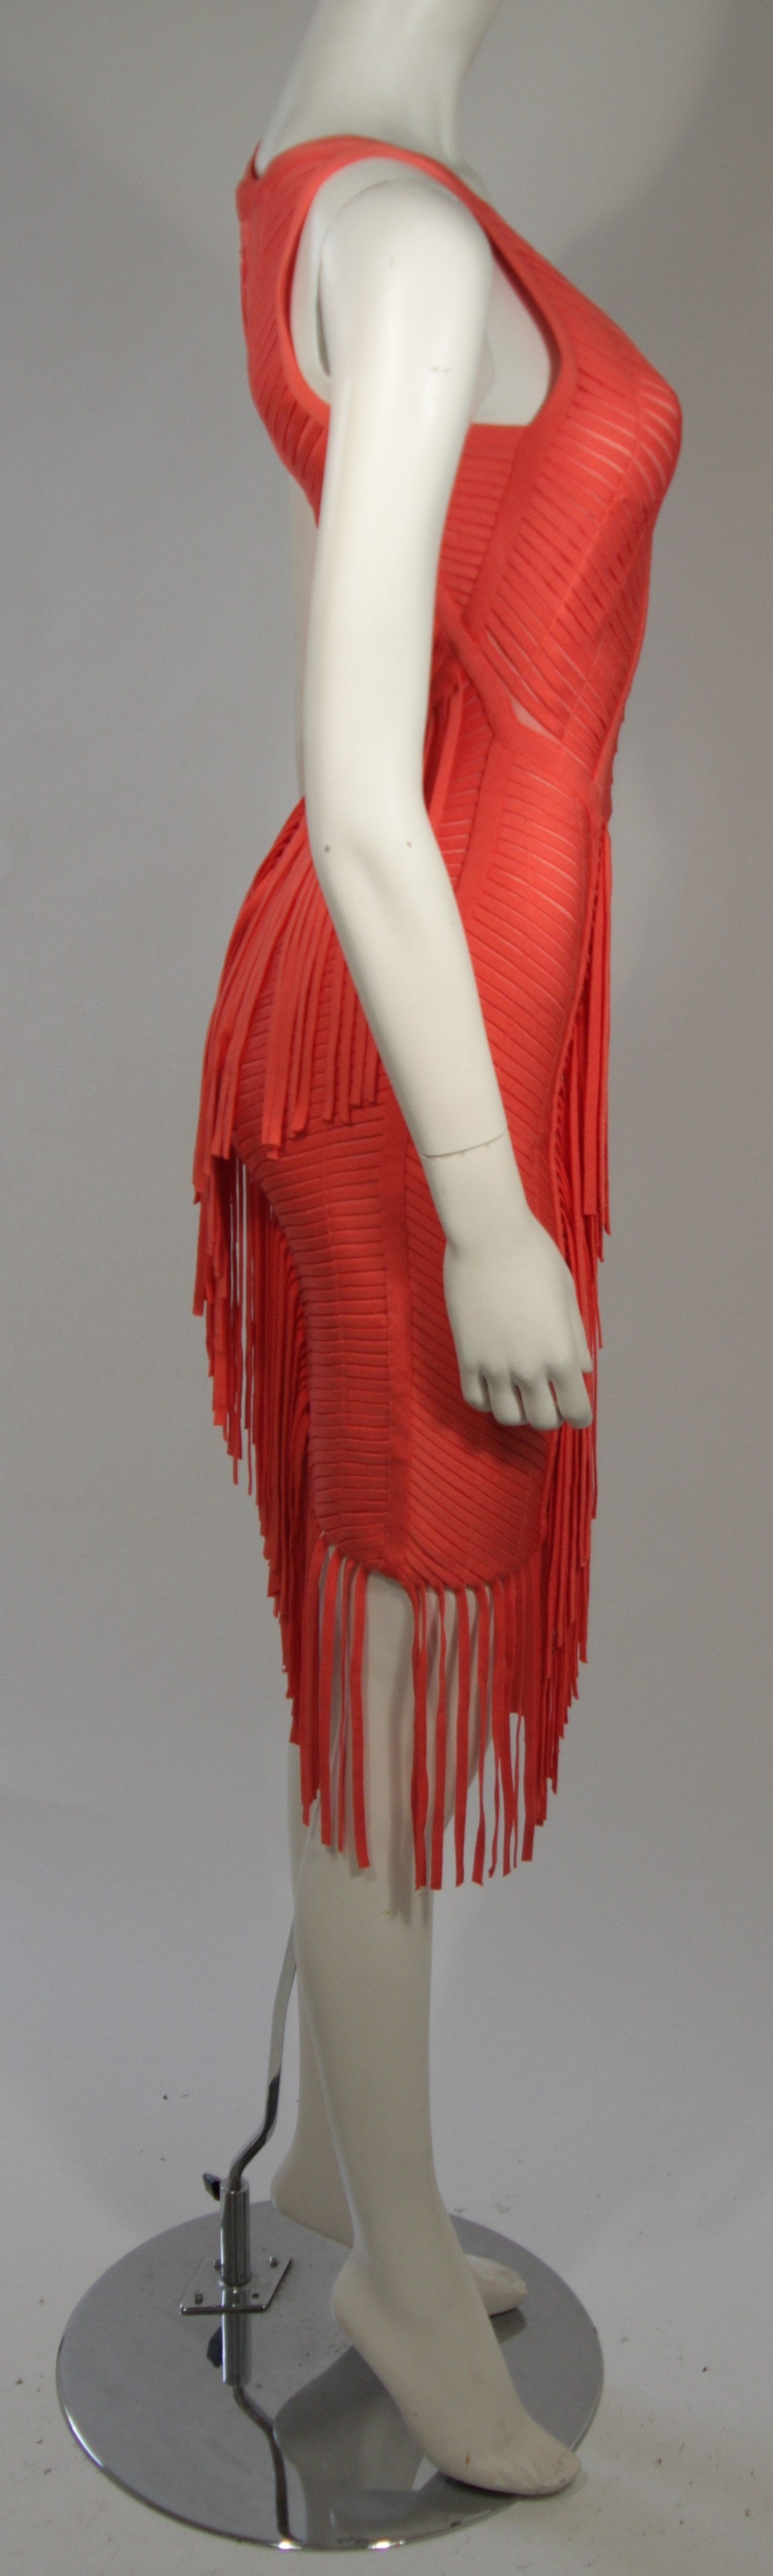 Red Herve Leger Orange Fringed Bodycon Dress Size XS For Sale